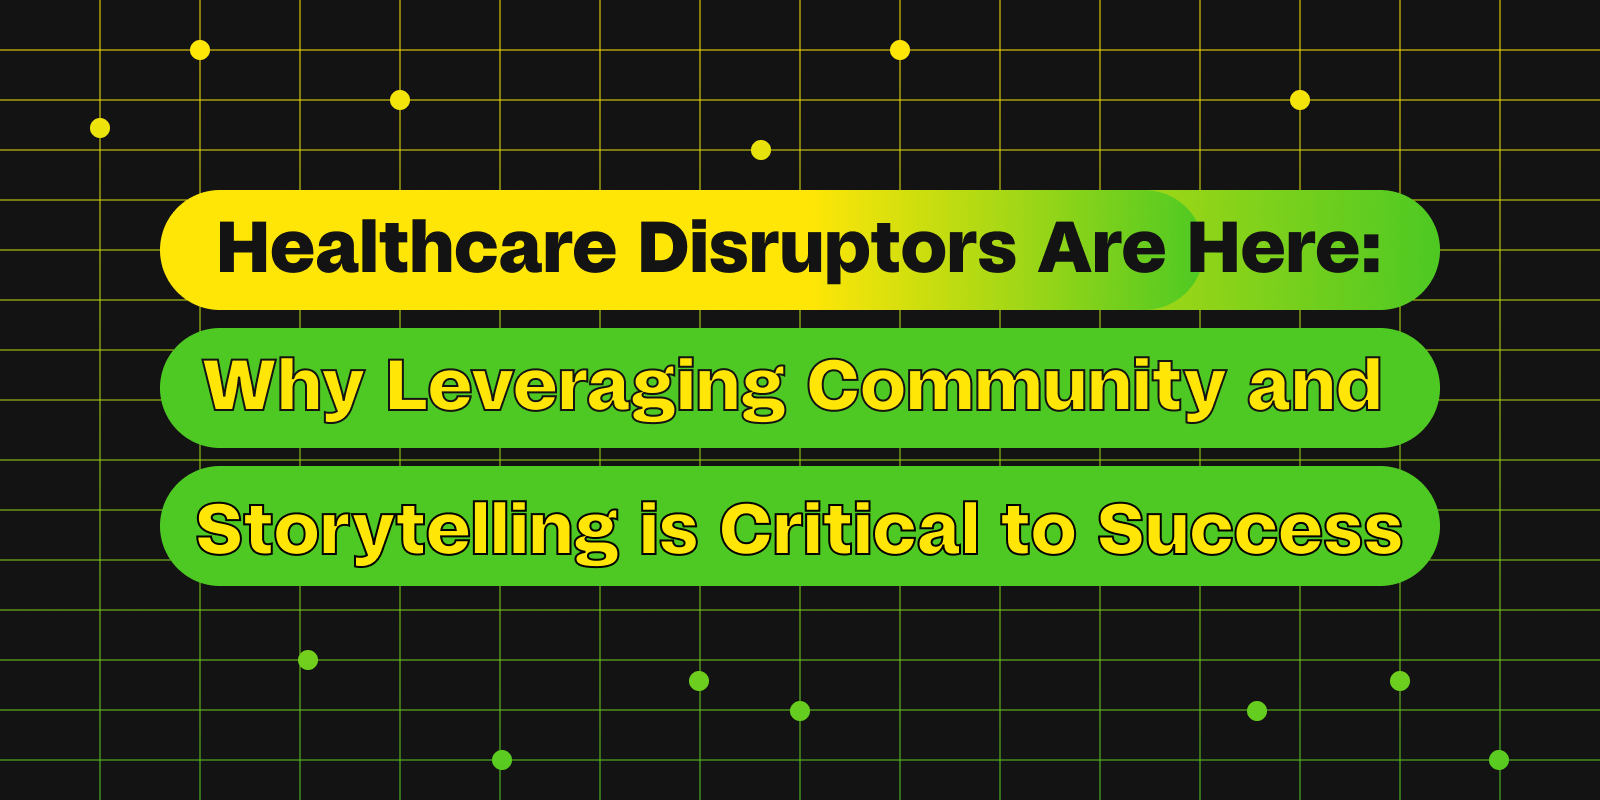 Healthcare Disruptors Are Here: Leveraging Community and Authenticity for Success